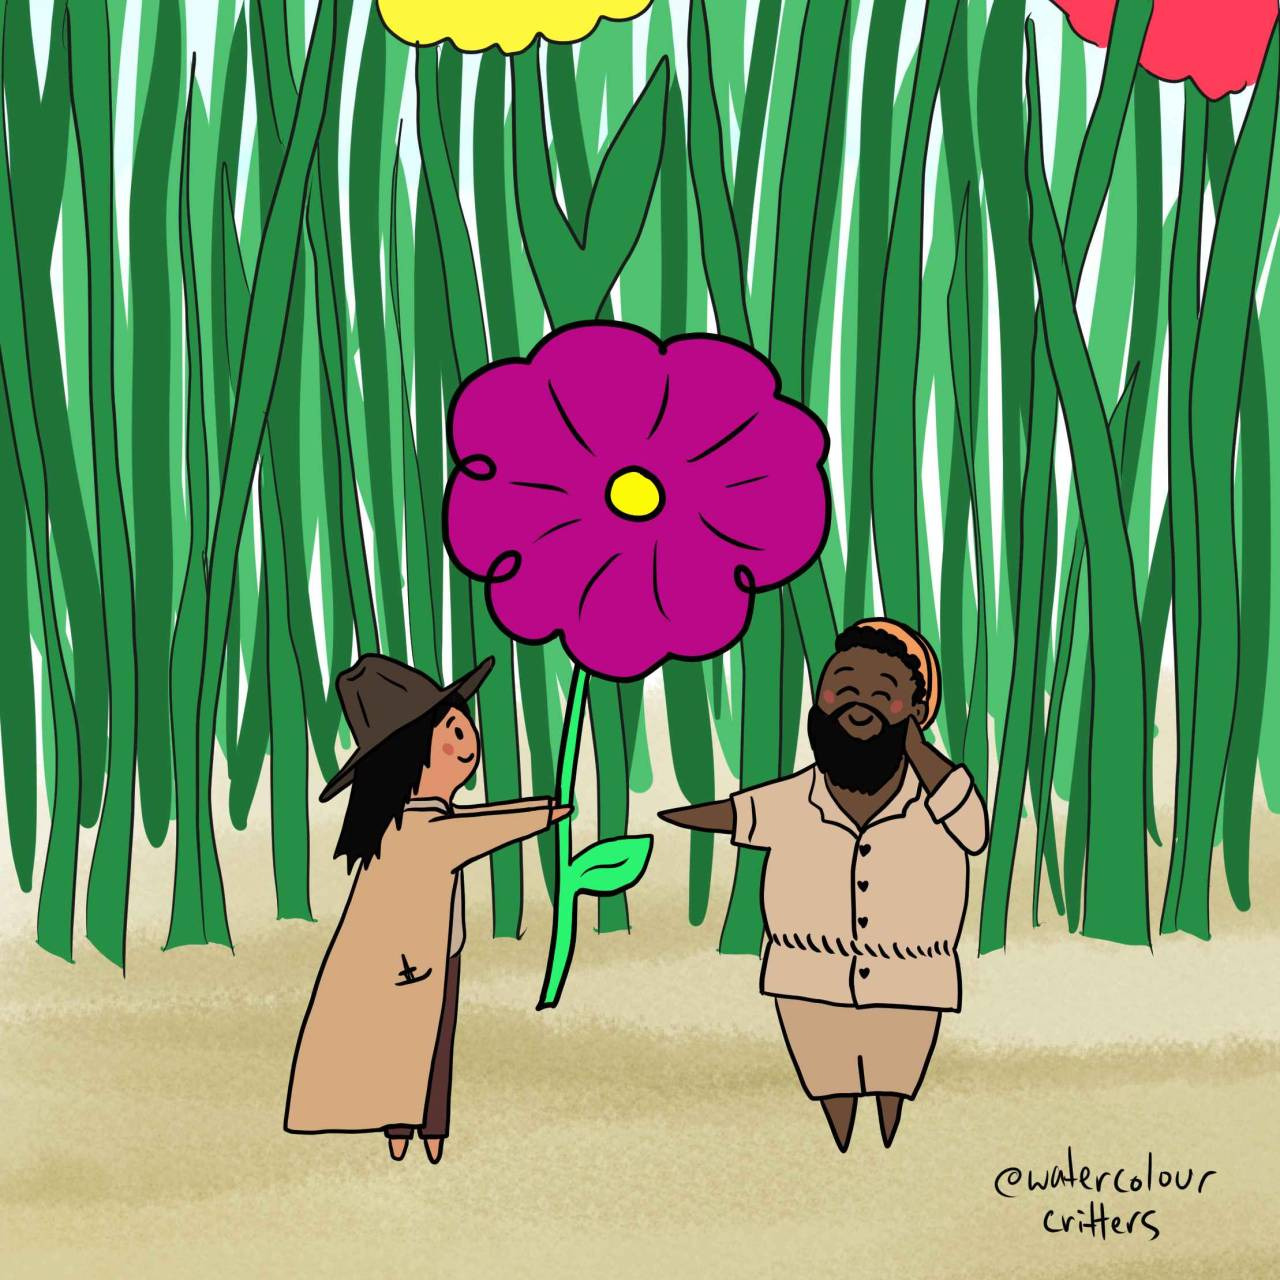 A digital drawing of Jim and Oluwande done in a cartoon style. They both wear their season 1 outfits. Jim holds out a massive purple flower that is almost bigger than they are to Oluwande, who holds out a hand to take it and blushes. Jim and Oluwande stand on sandy ground, with grass and flowers that are 3 times taller than they are in the background. The artist's signature reads @ watercolour critters